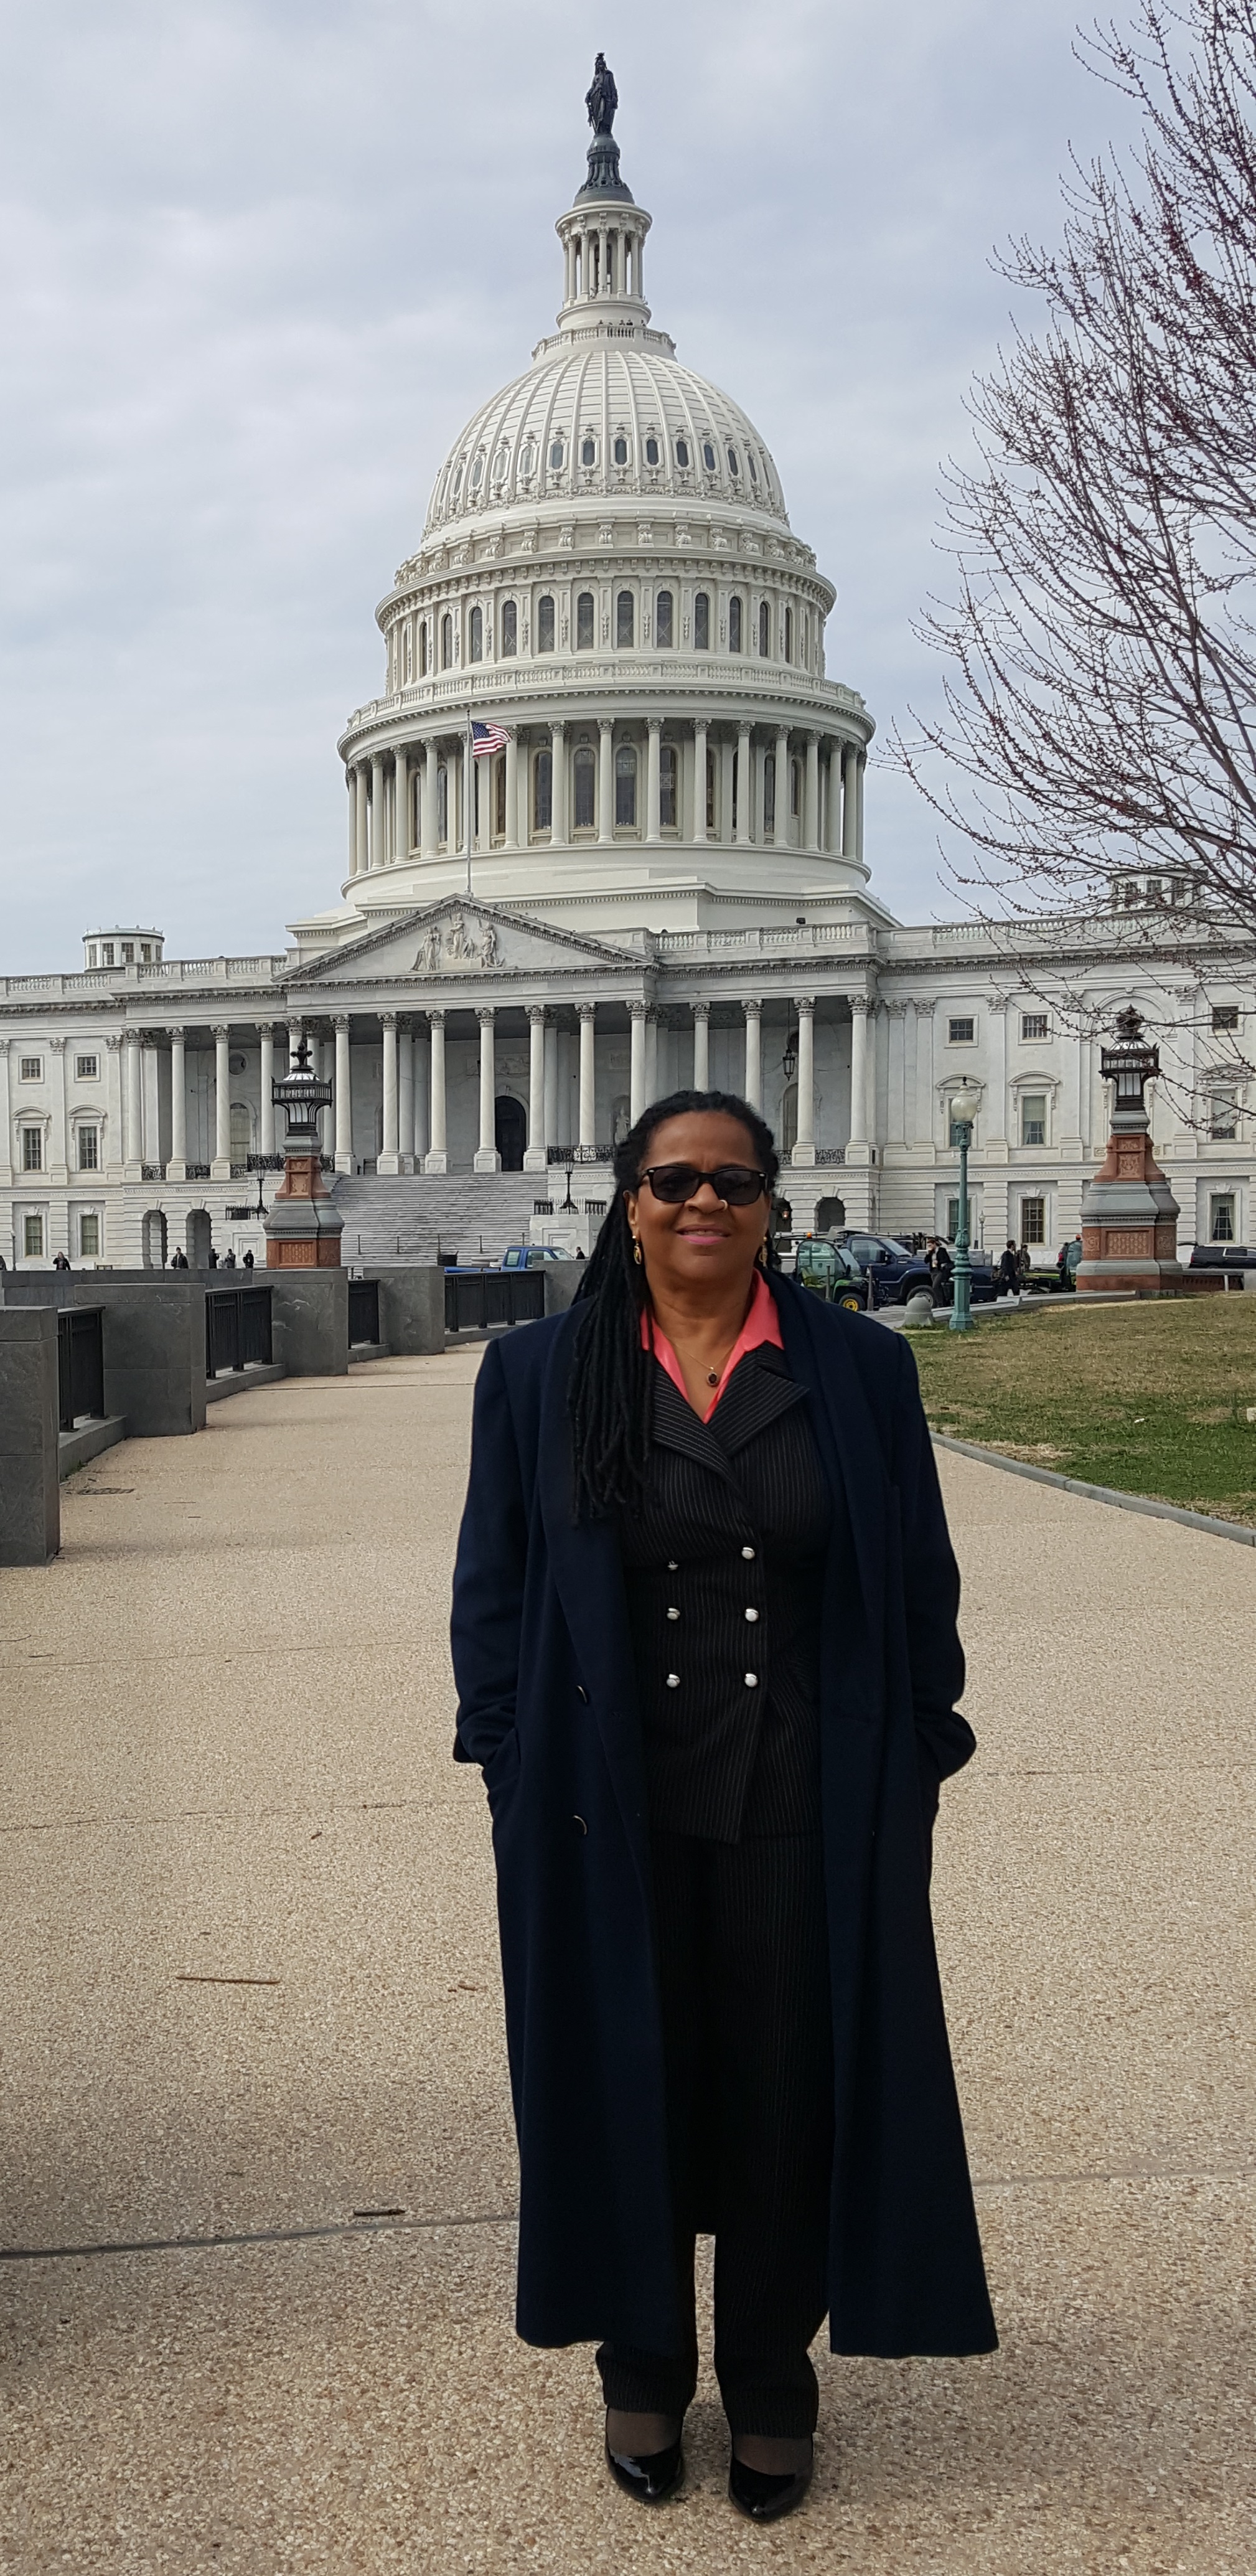 Pamela M. Covington dressed in a full-length coat in preparation for a blustery day on Capital Hill.